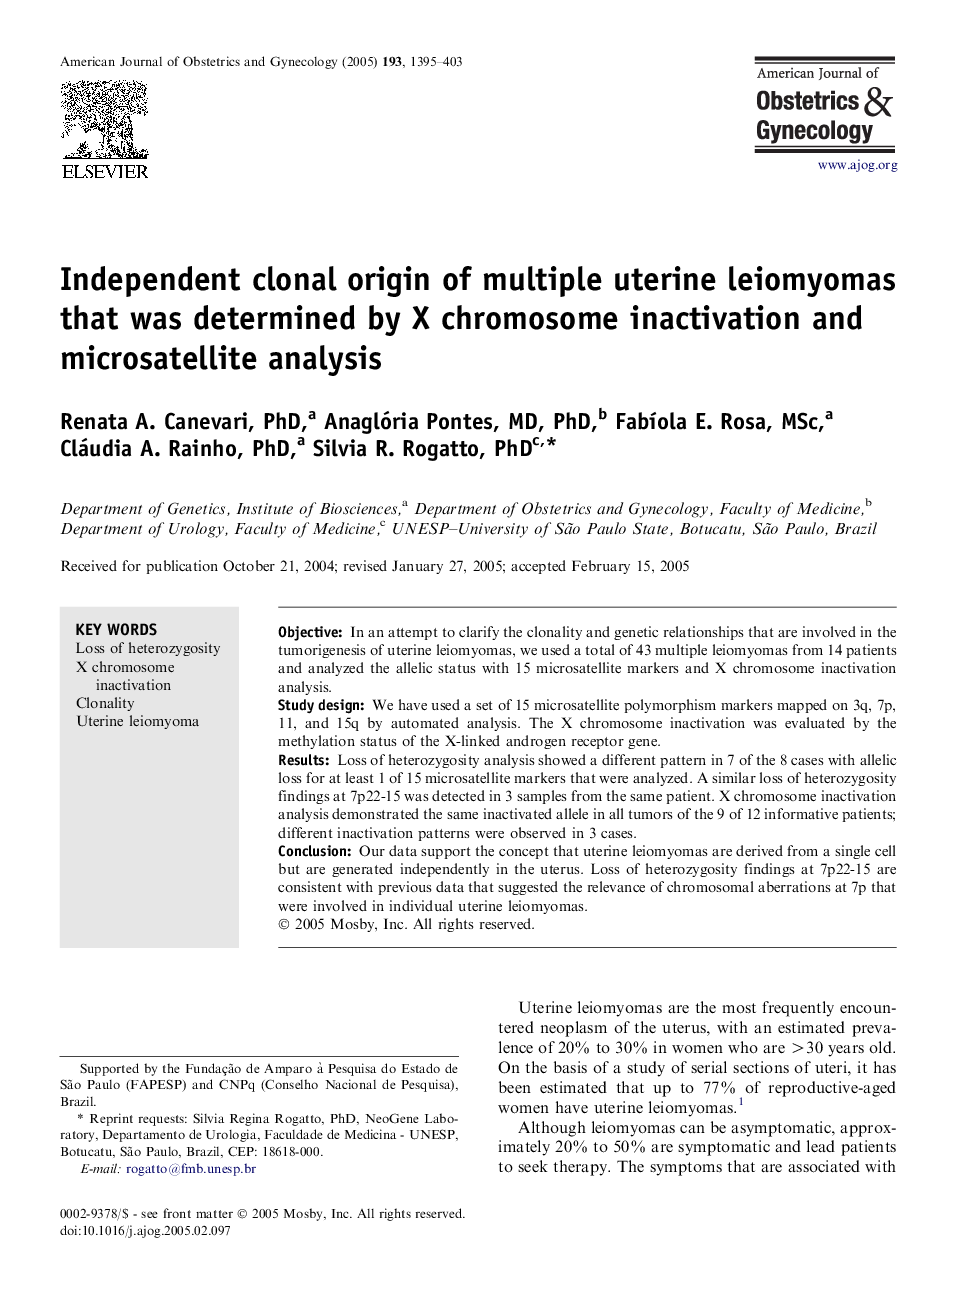 Independent clonal origin of multiple uterine leiomyomas that was determined by X chromosome inactivation and microsatellite analysis